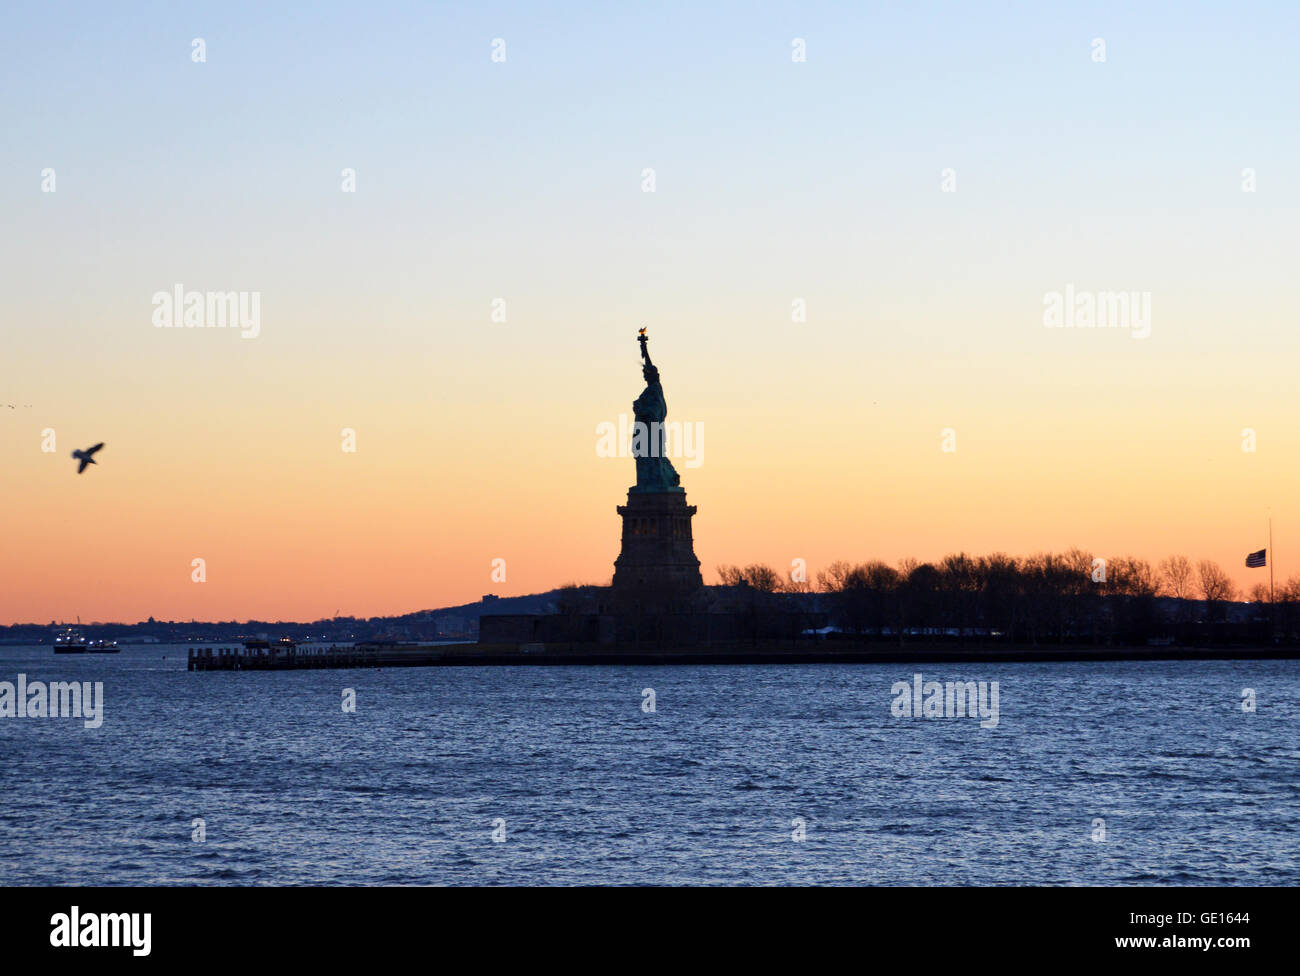 Statue of Liberty at dusk, New York Stock Photo